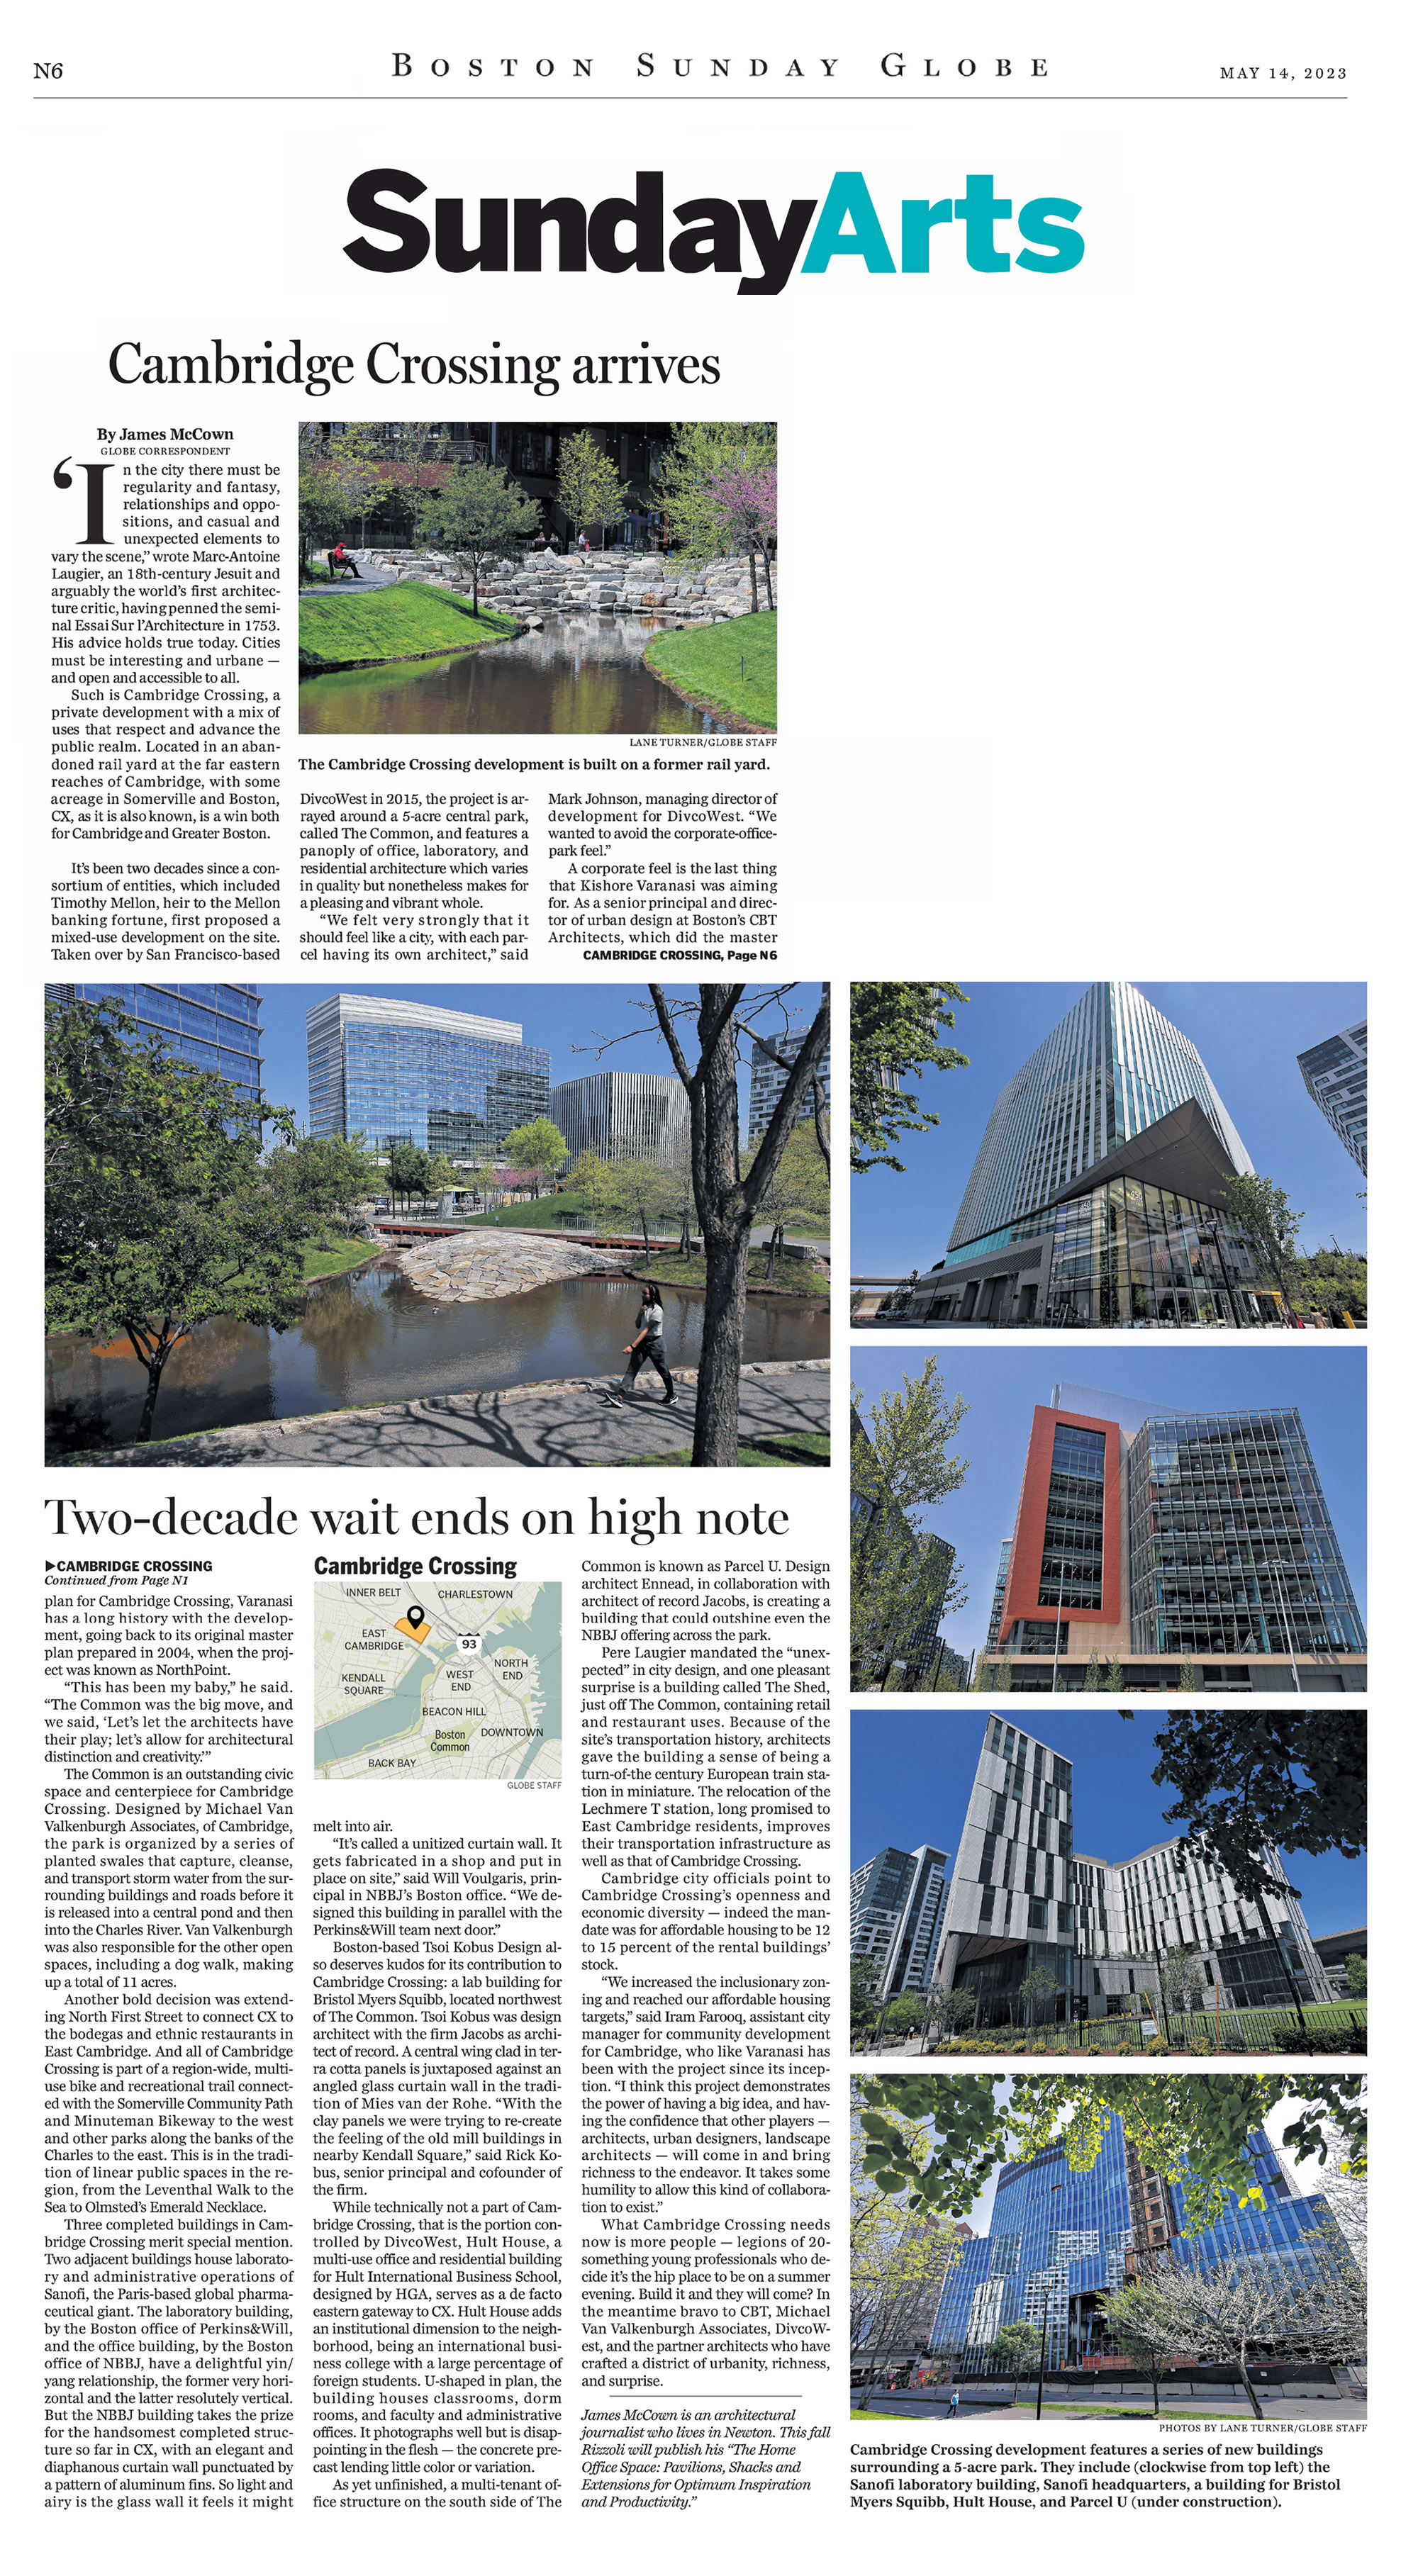 The Boston Globe Features Cambridge Crossing and a recent lab/office project by Tsoi Kobus Design